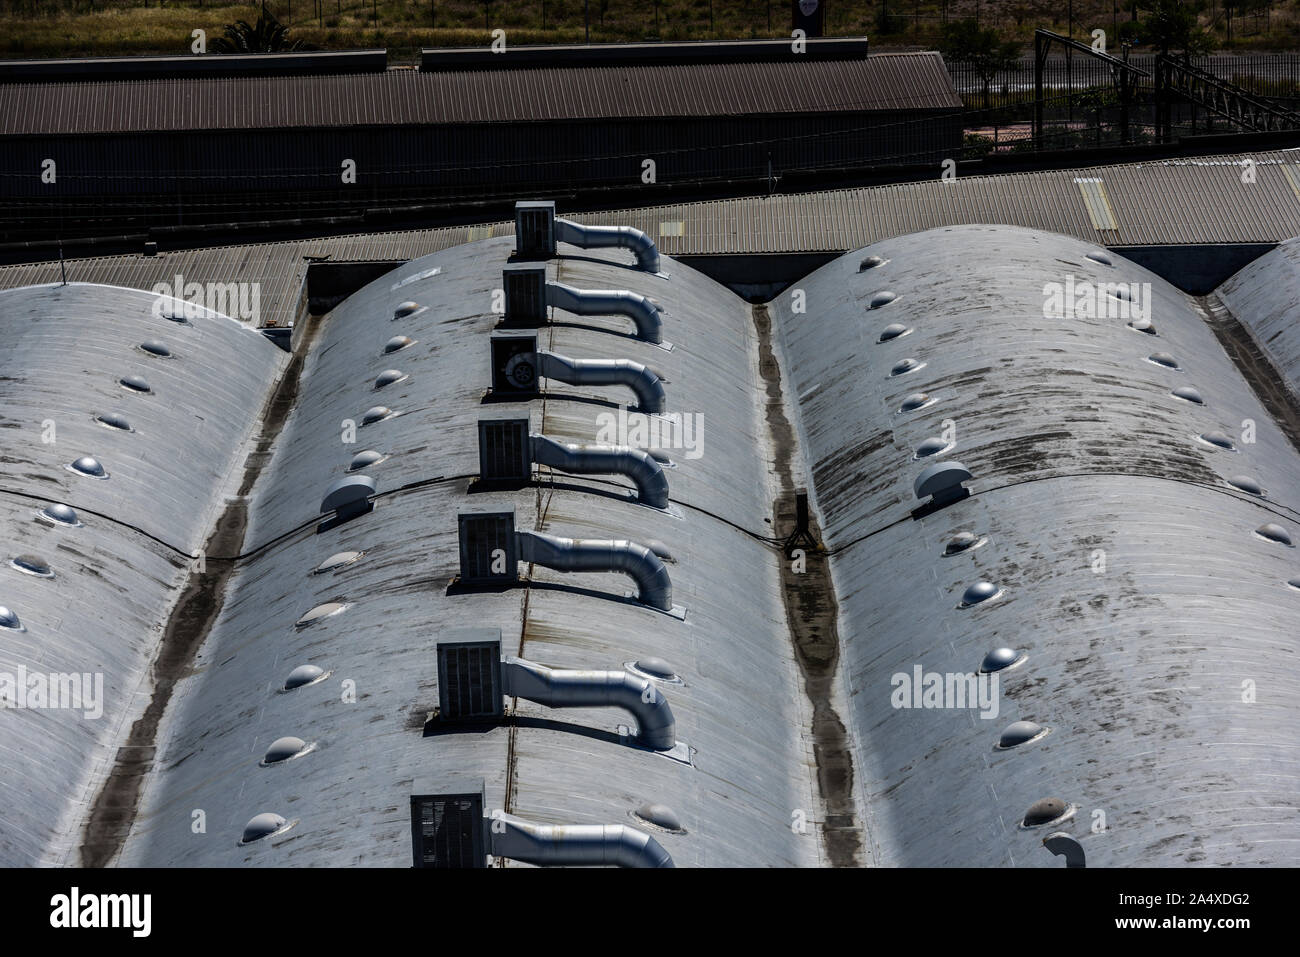 A bunker fuel depot at South Africa's Cape Town container port are fitted with air conditioning units to maintain safe operating temperatures Stock Photo